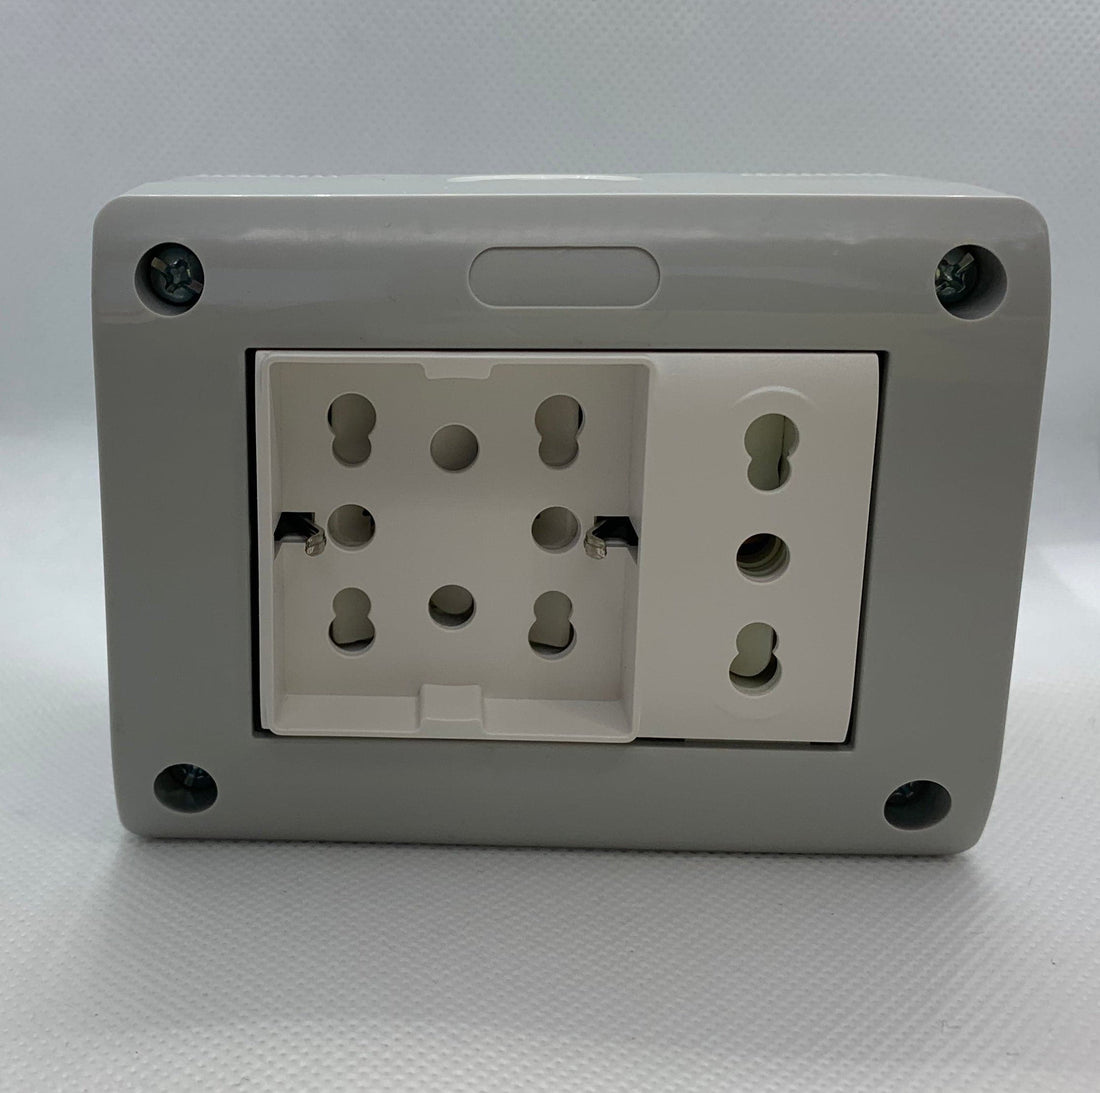 ENCLOSURE IP40 3 PLACES WITH UNIVERSAL SOCKET+BIPASS SOCKET - best price from Maltashopper.com BR420006630